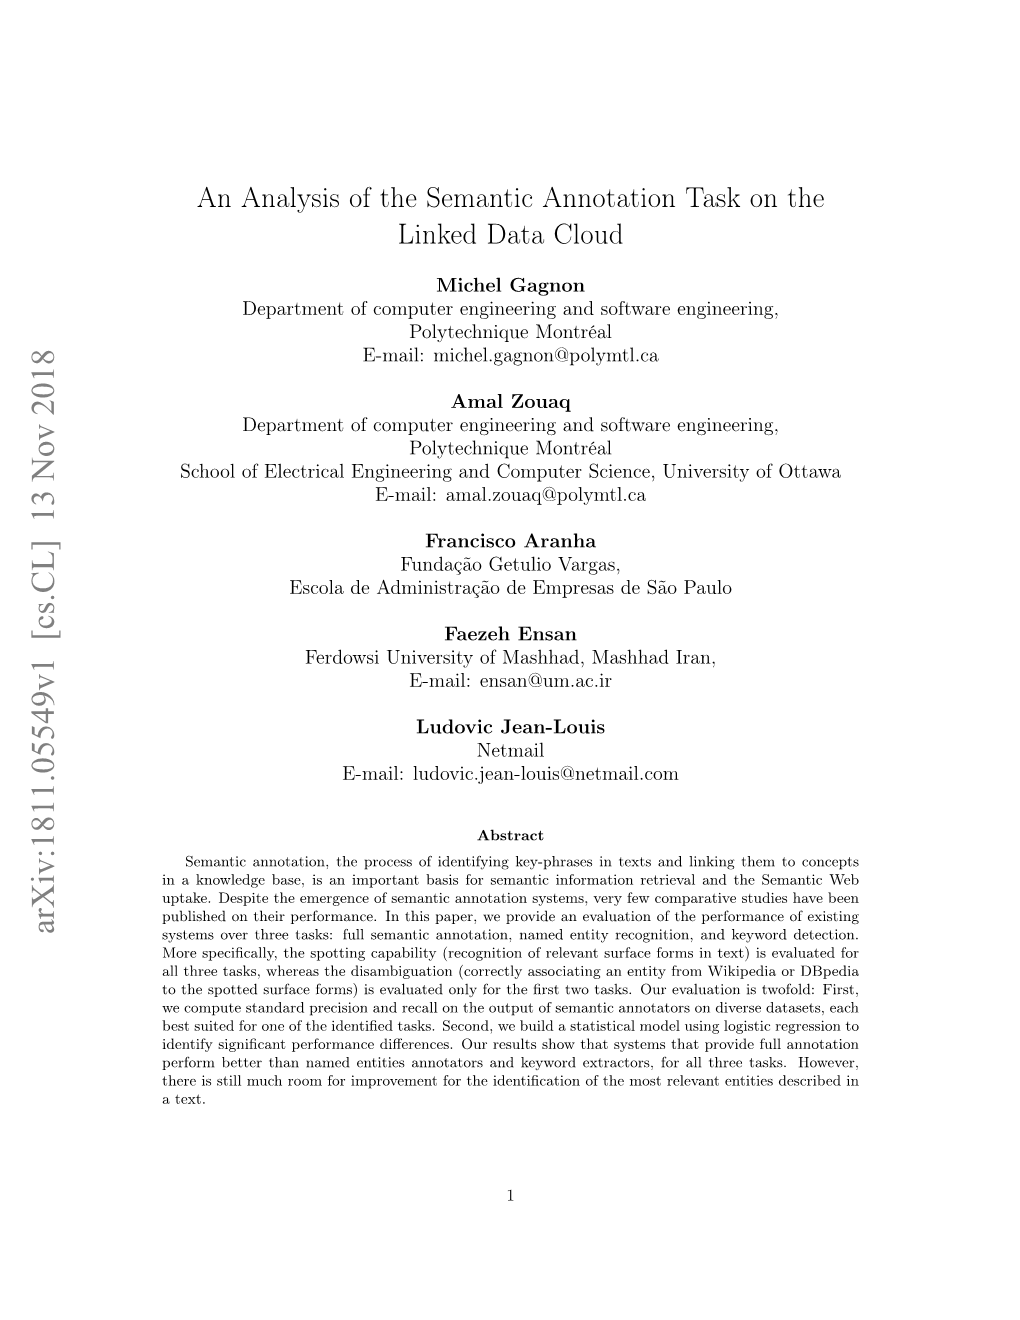 An Analysis of the Semantic Annotation Task on the Linked Data Cloud